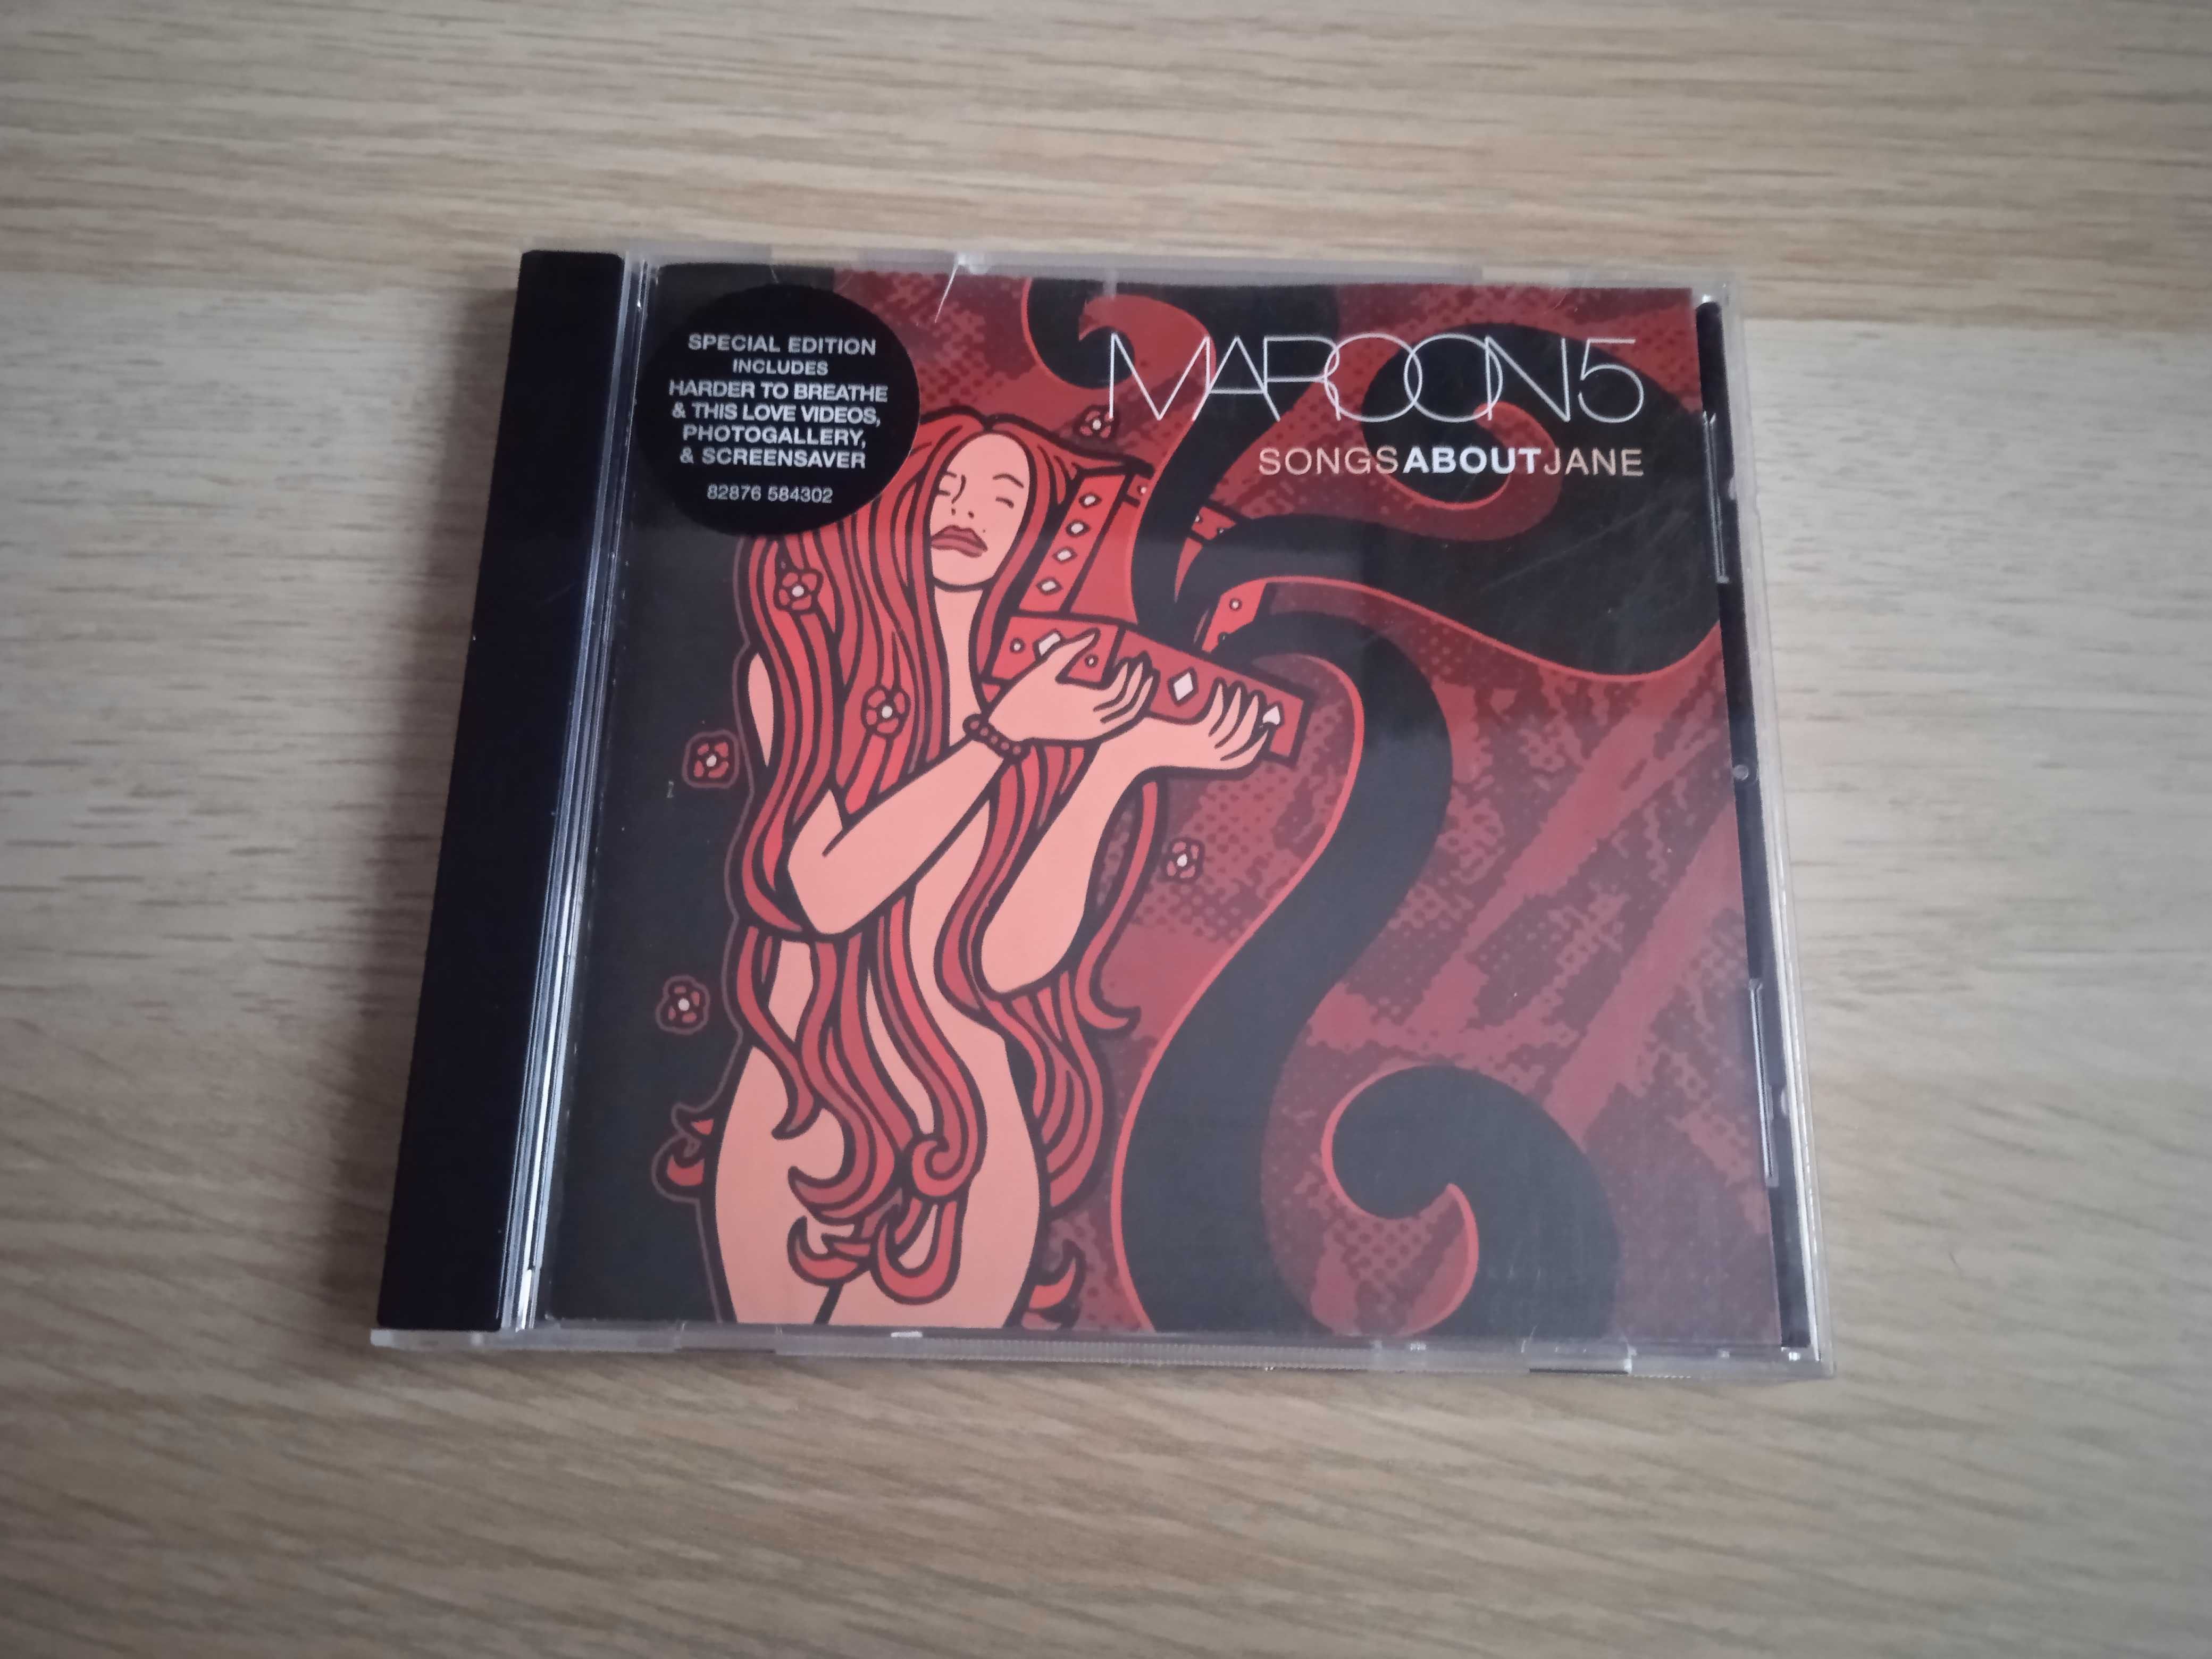 MAROON 5 - Songs About Jane *CD